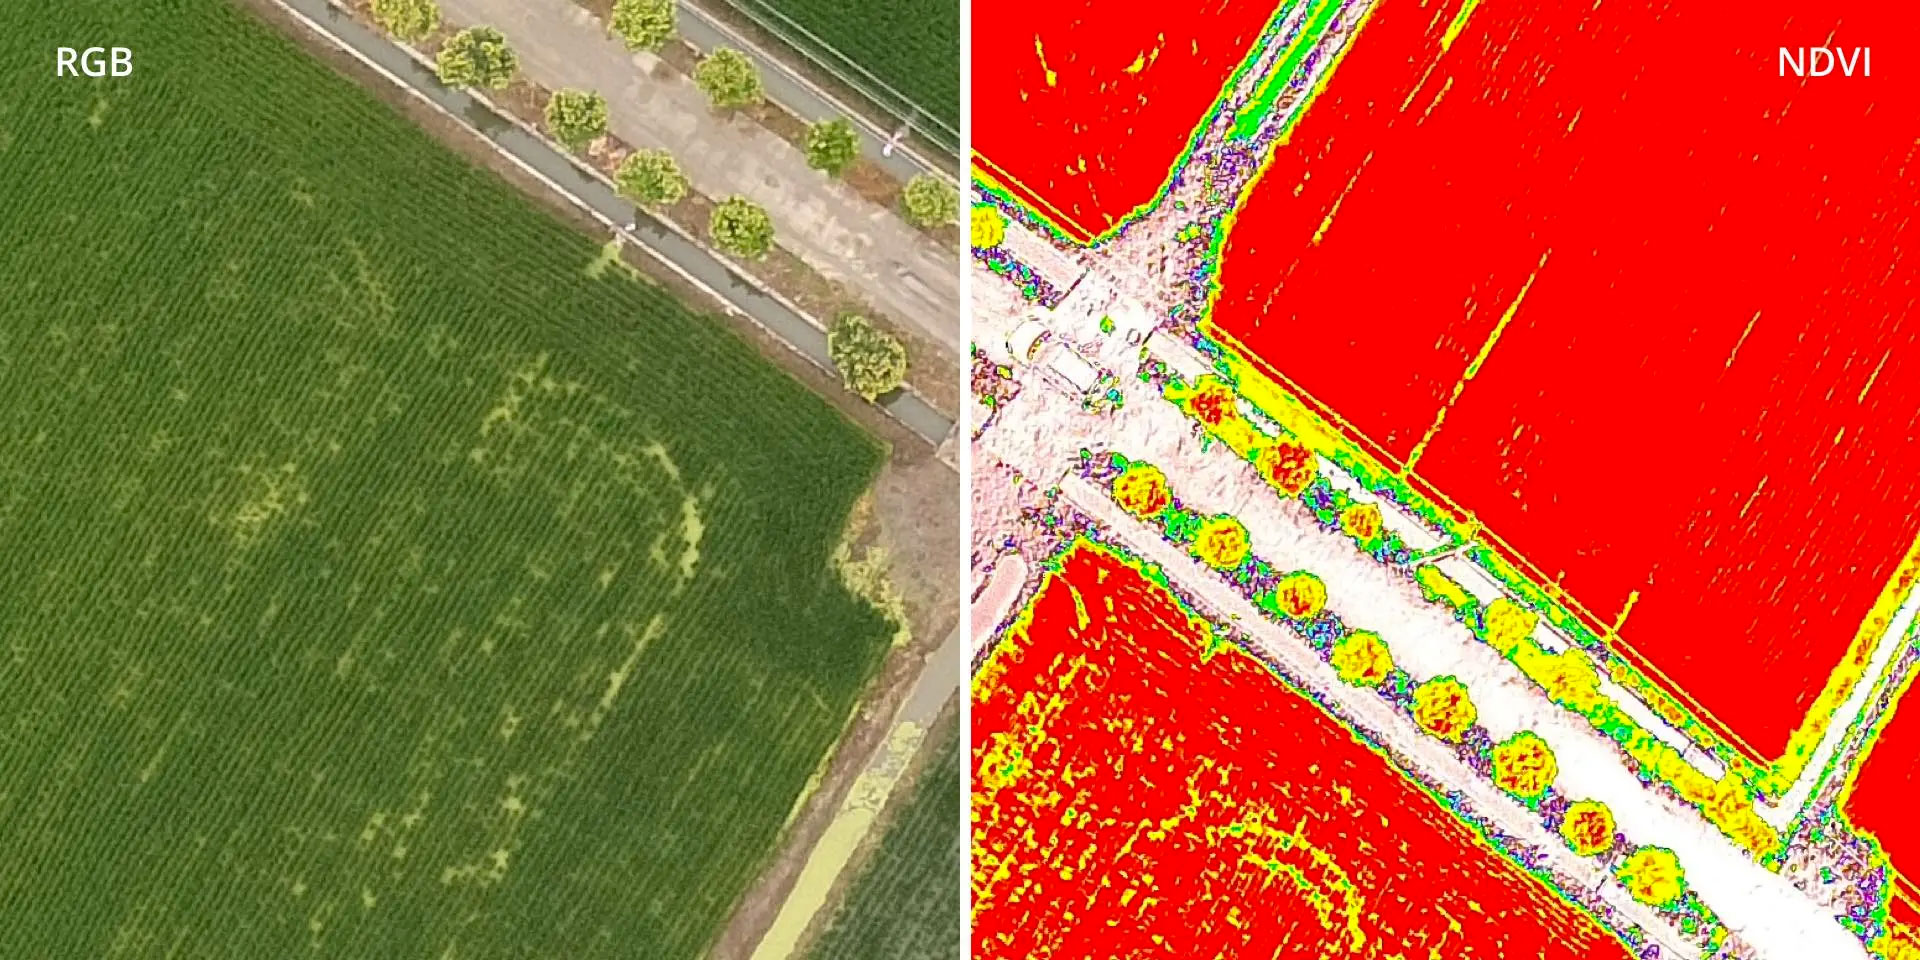 DJI P4 Multispectral View Both RGB and NDVI Feeds